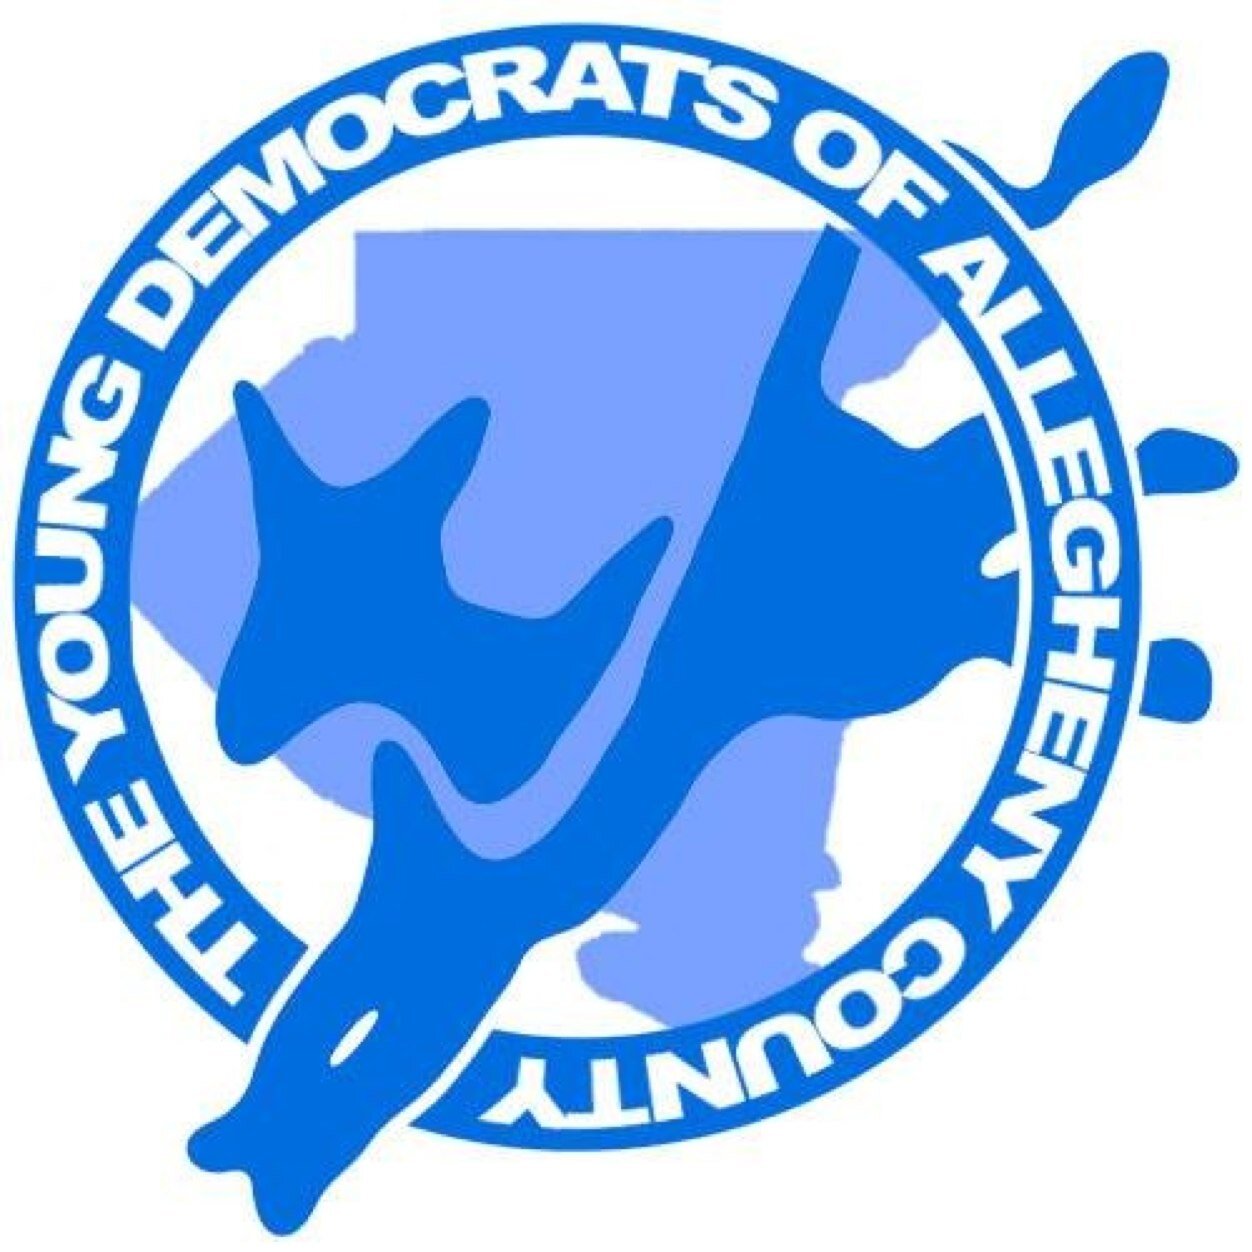 The Young Democrats of Allegheny County (YDAC) promotes the election of candidates who support the causes and concerns of Young Democrats everywhere.